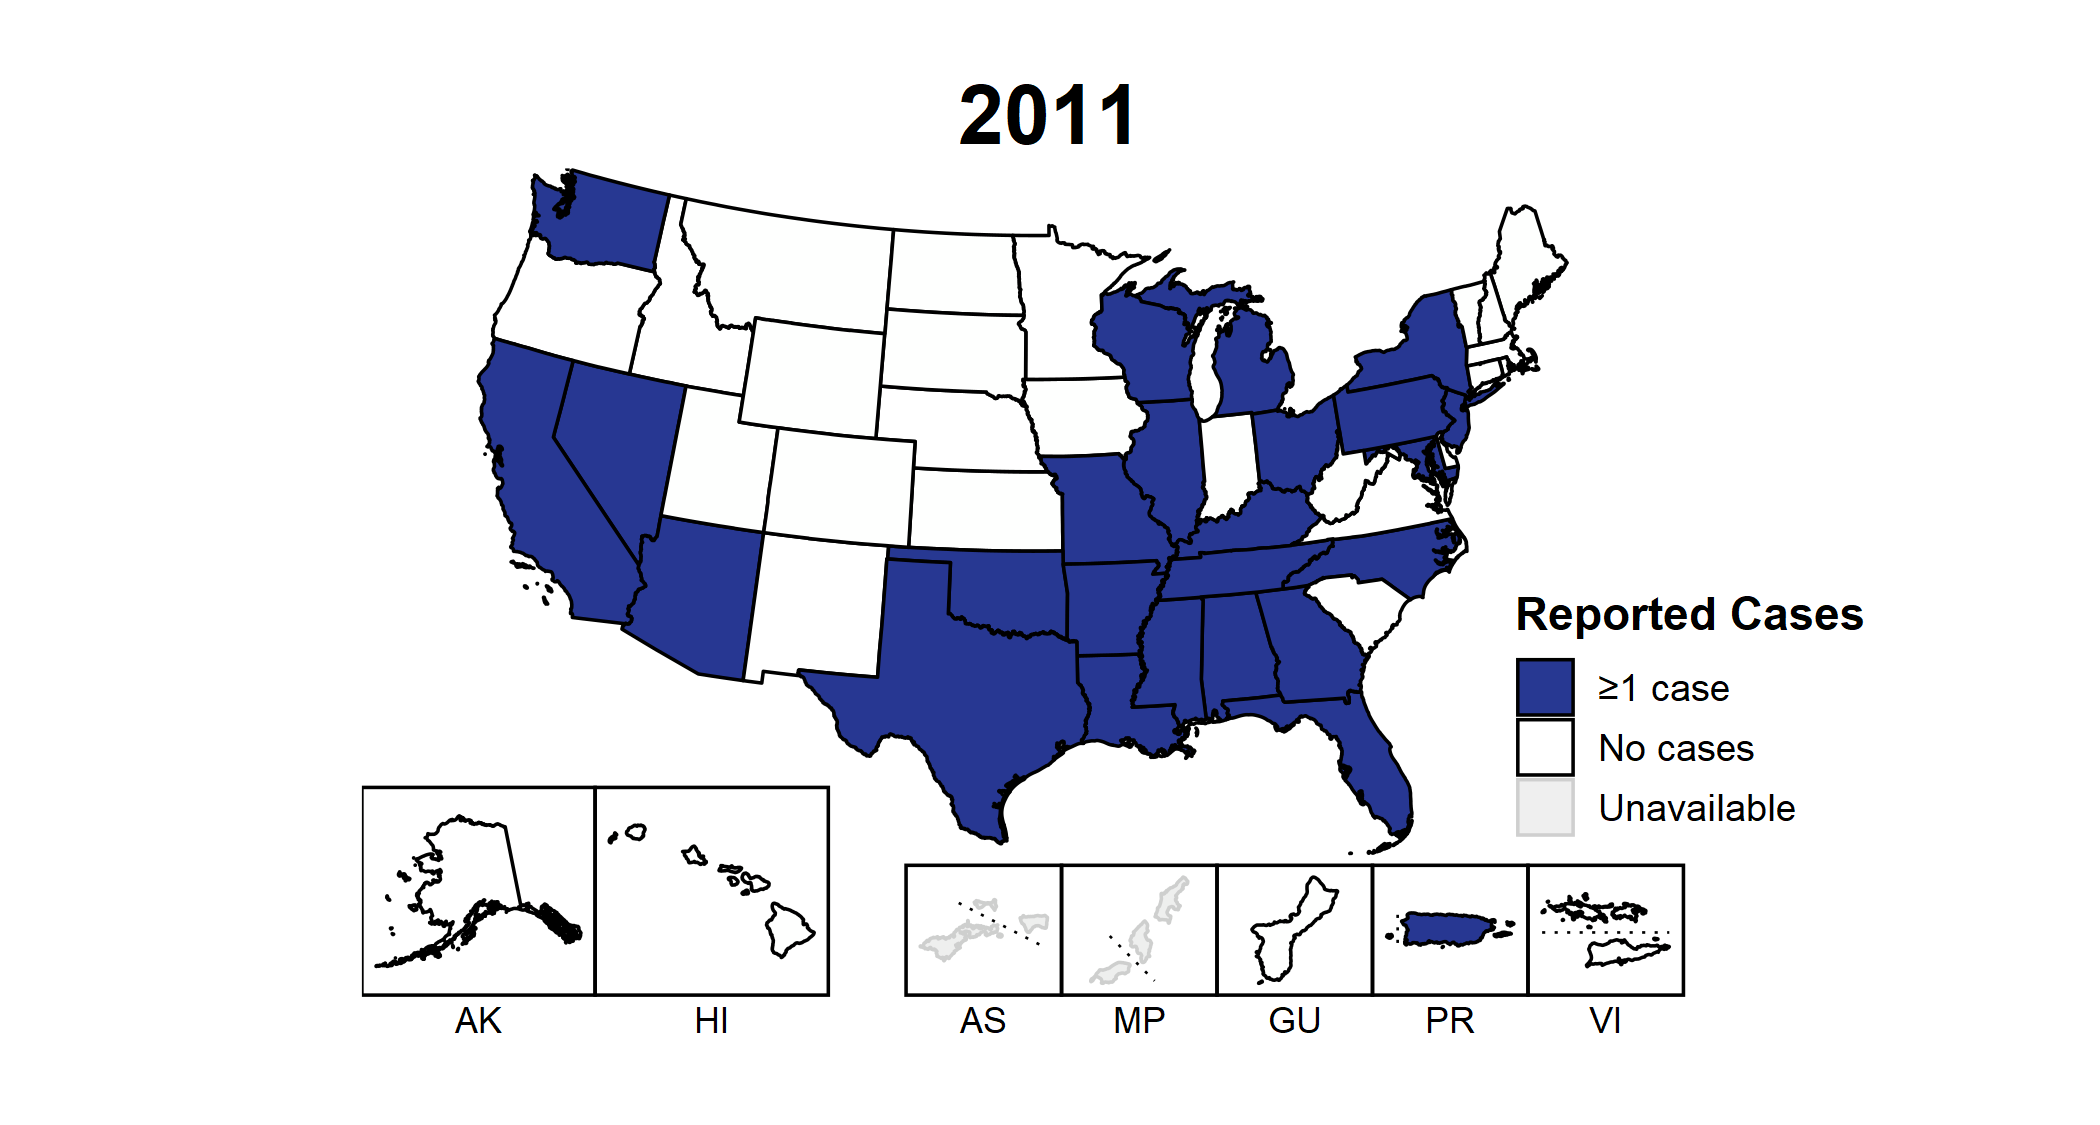 Animated United States map showing reported cases of congenital syphilis by state from 2011 to 2020